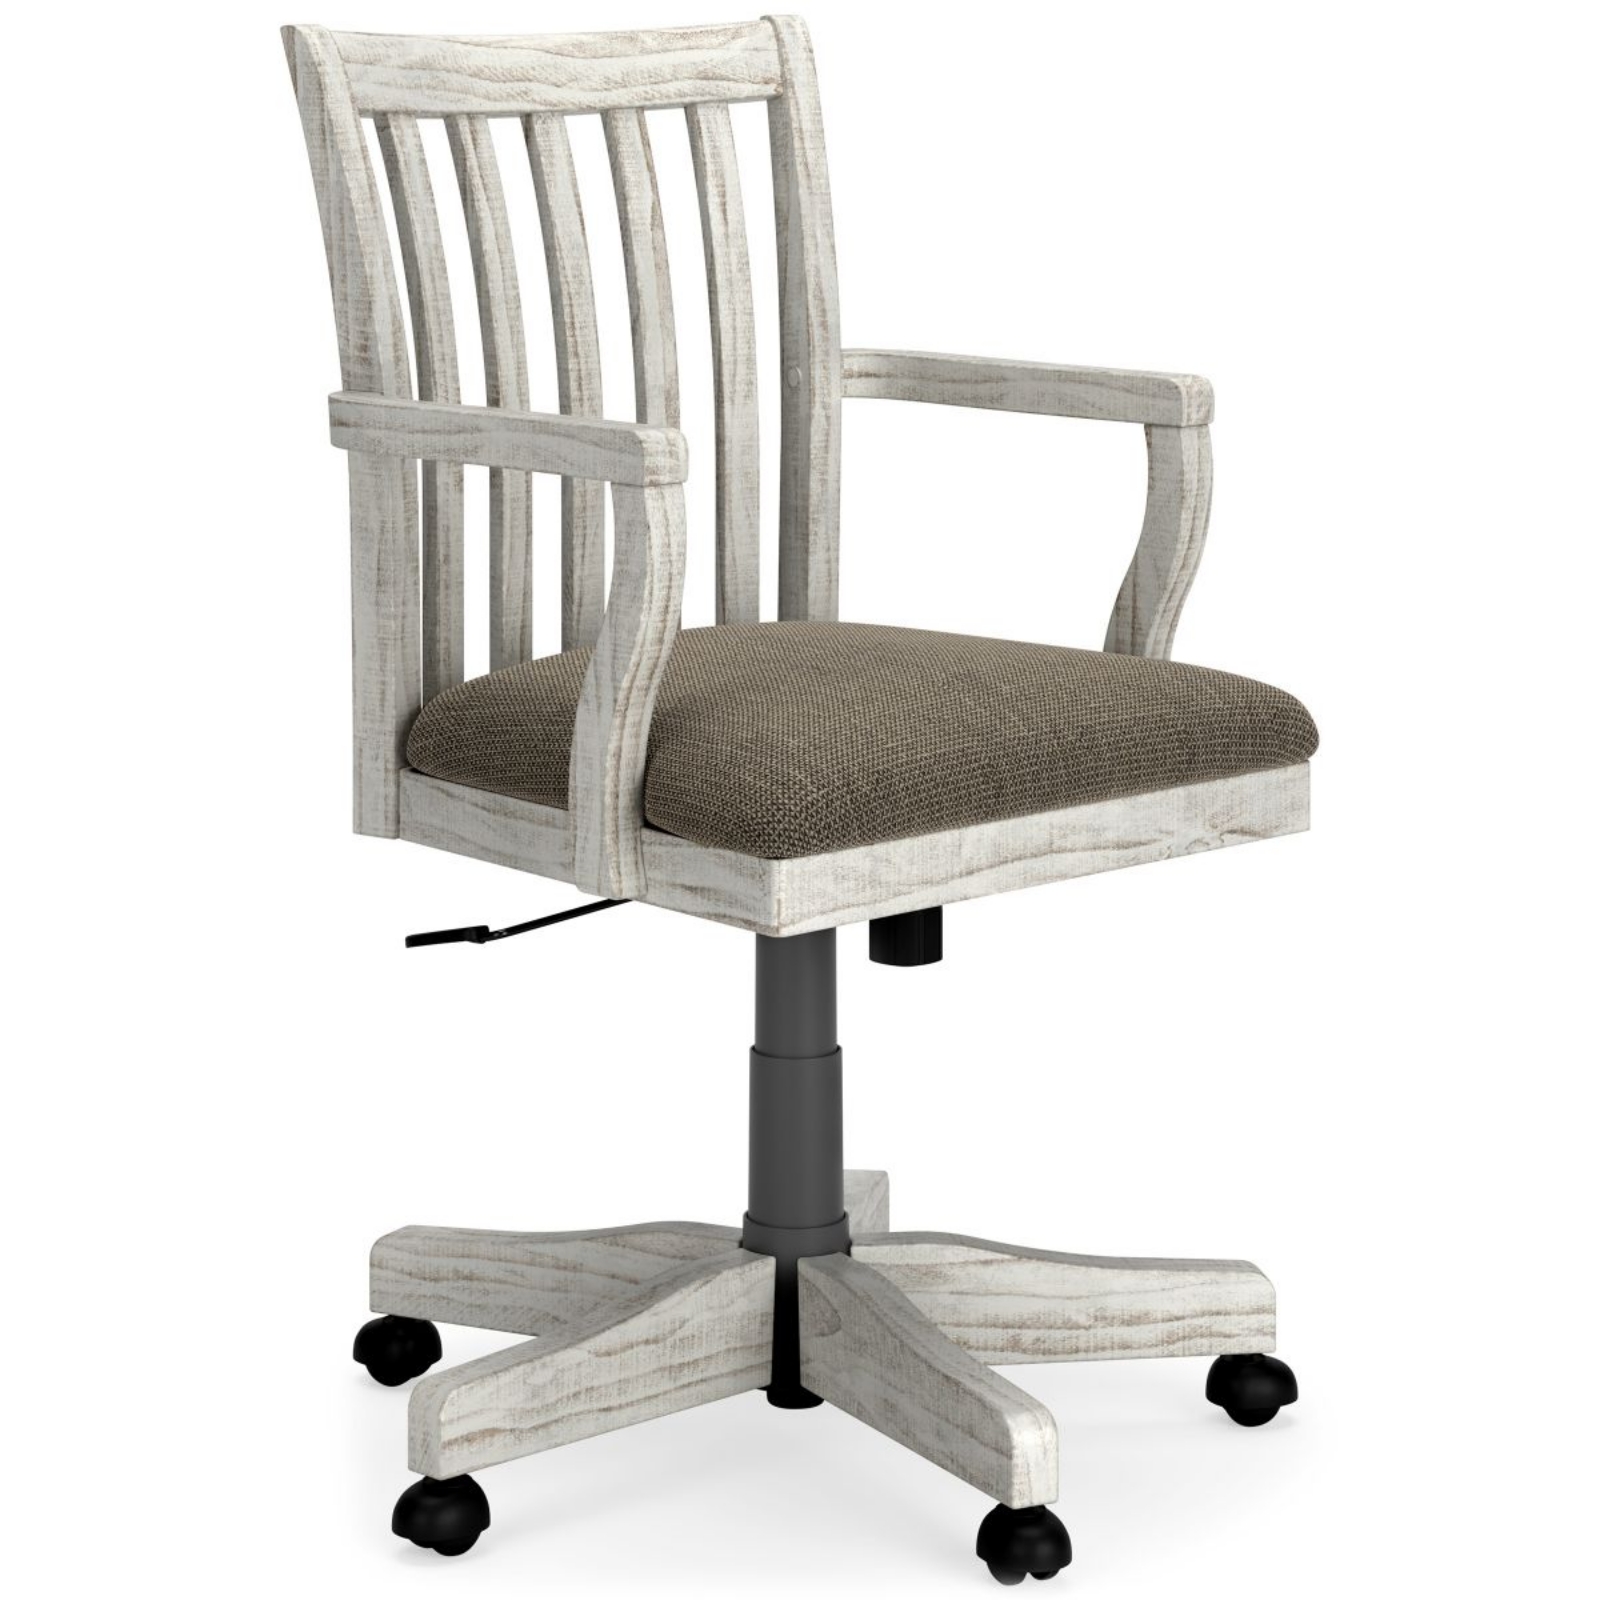 Picture of Havalance Desk Chair